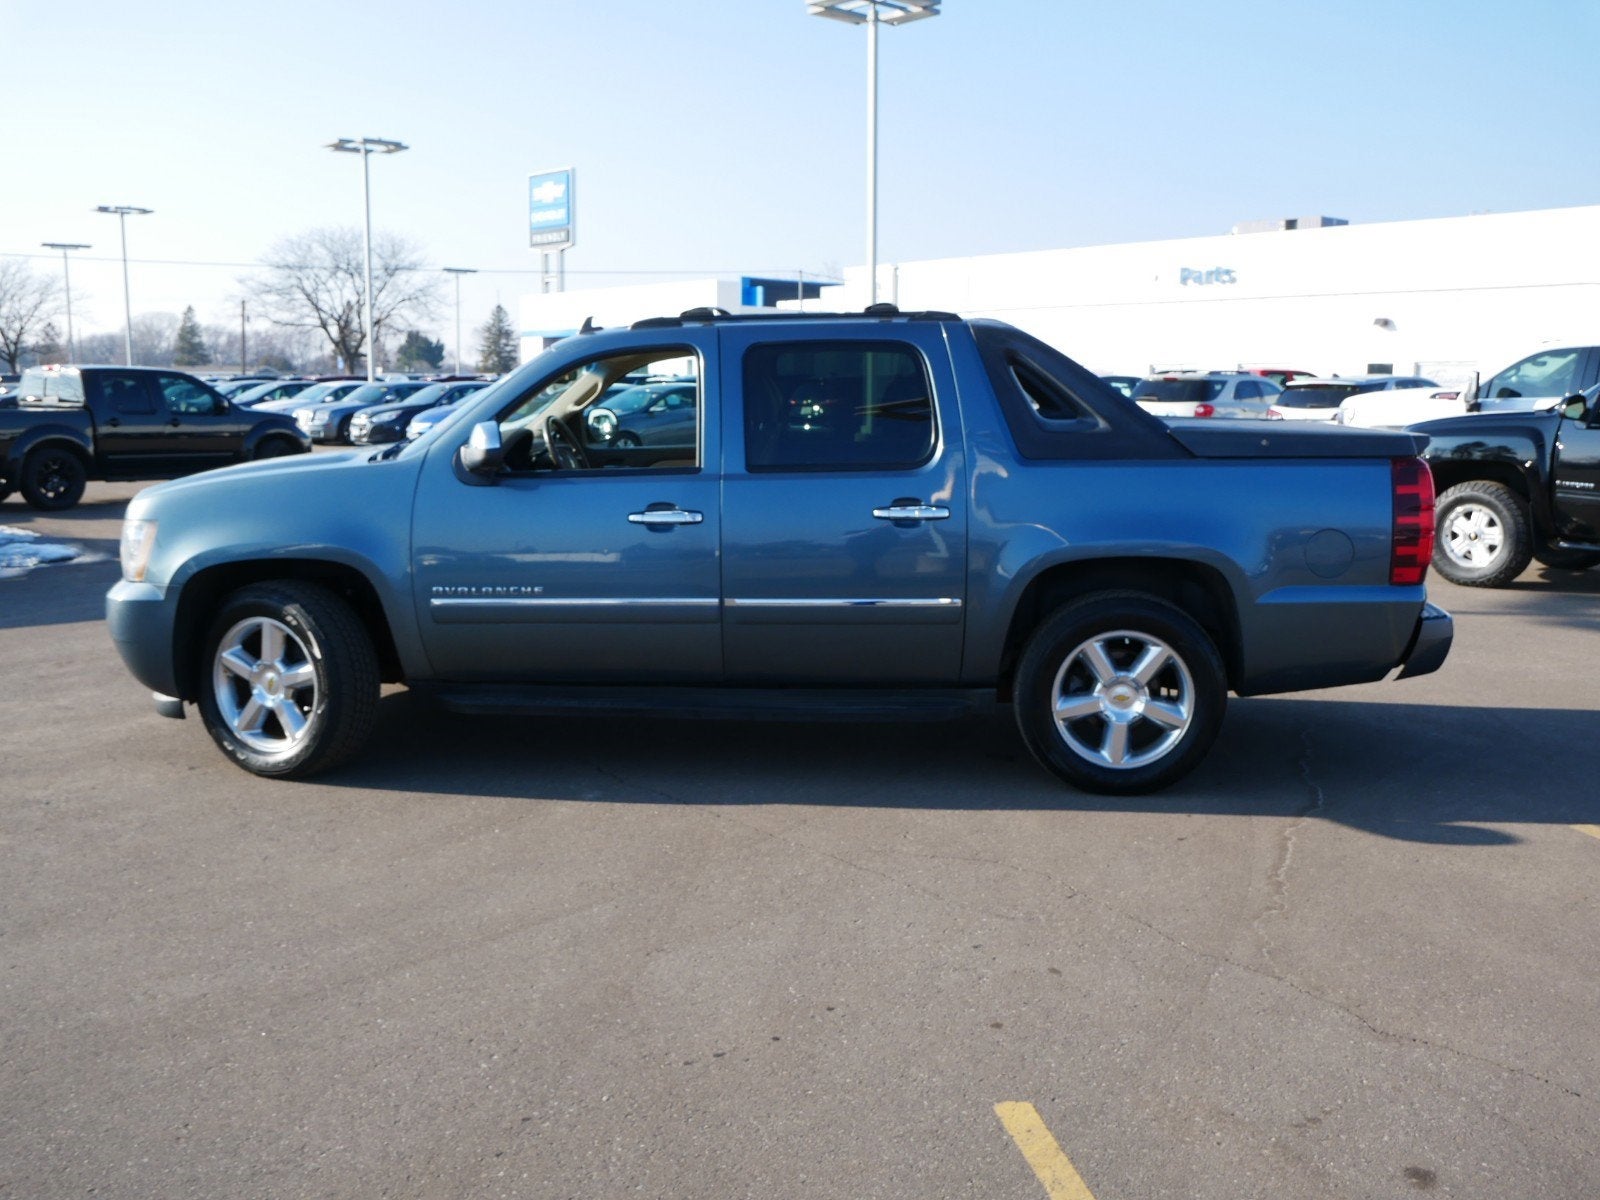 Used 2011 Chevrolet Avalanche LTZ with VIN 3GNTKGE3XBG218536 for sale in Fridley, Minnesota